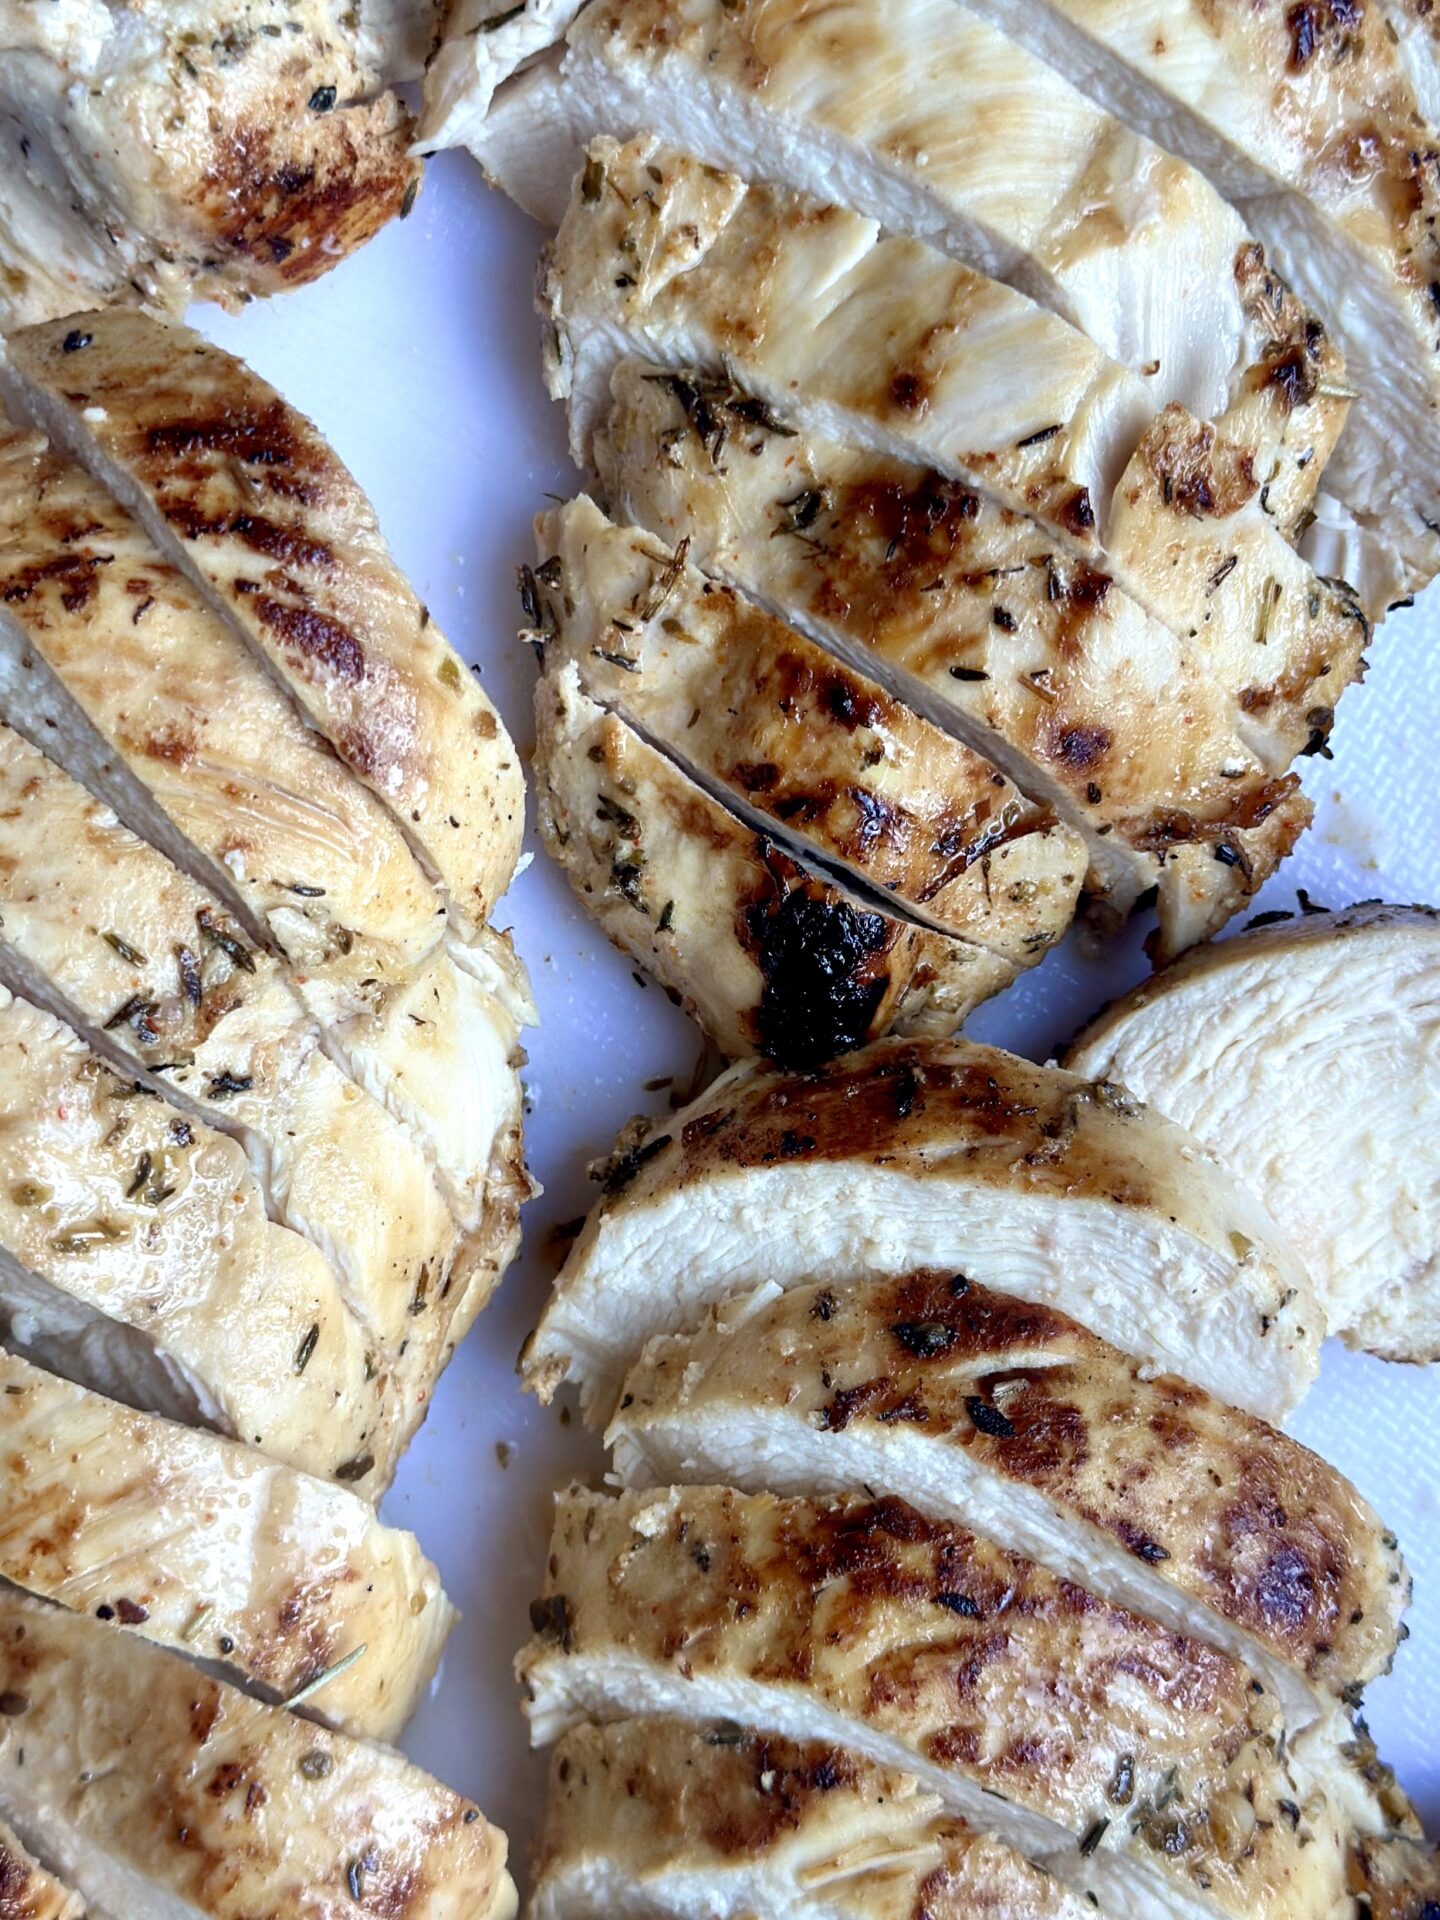 Grilled marinated chicken is sliced to show that it is perfectly cooked and juicy.